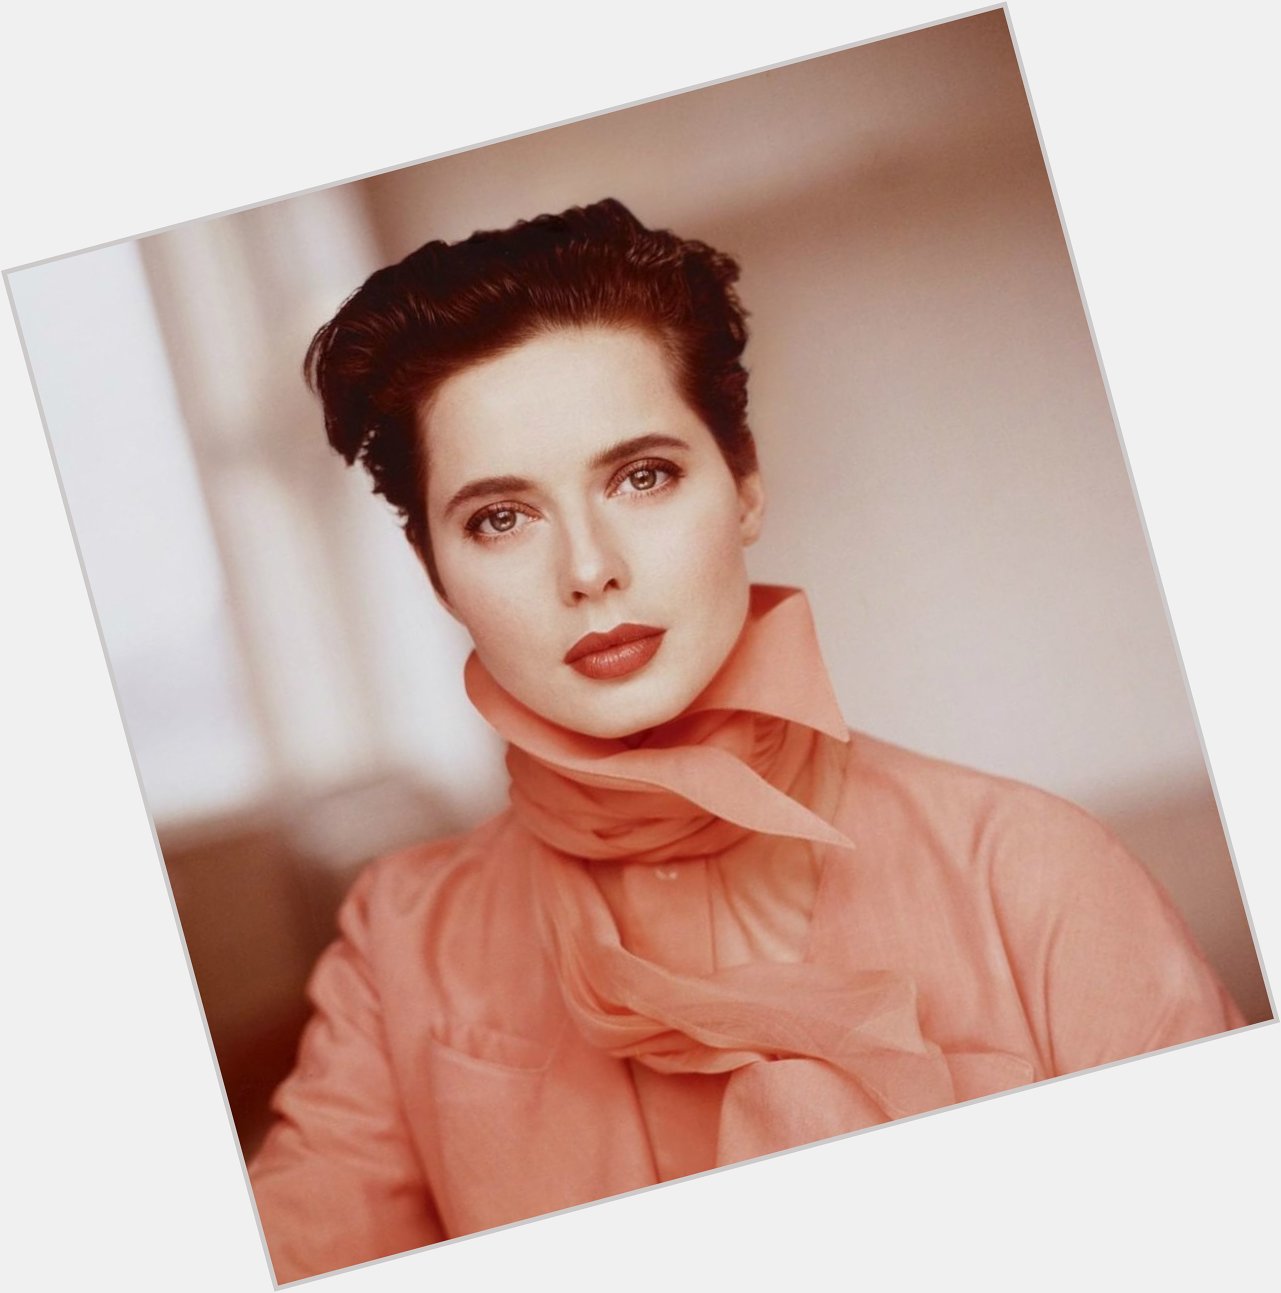 Happy Birthday to  Actress - Isabella Rossellini Who is 70yo today
(1989 below) 